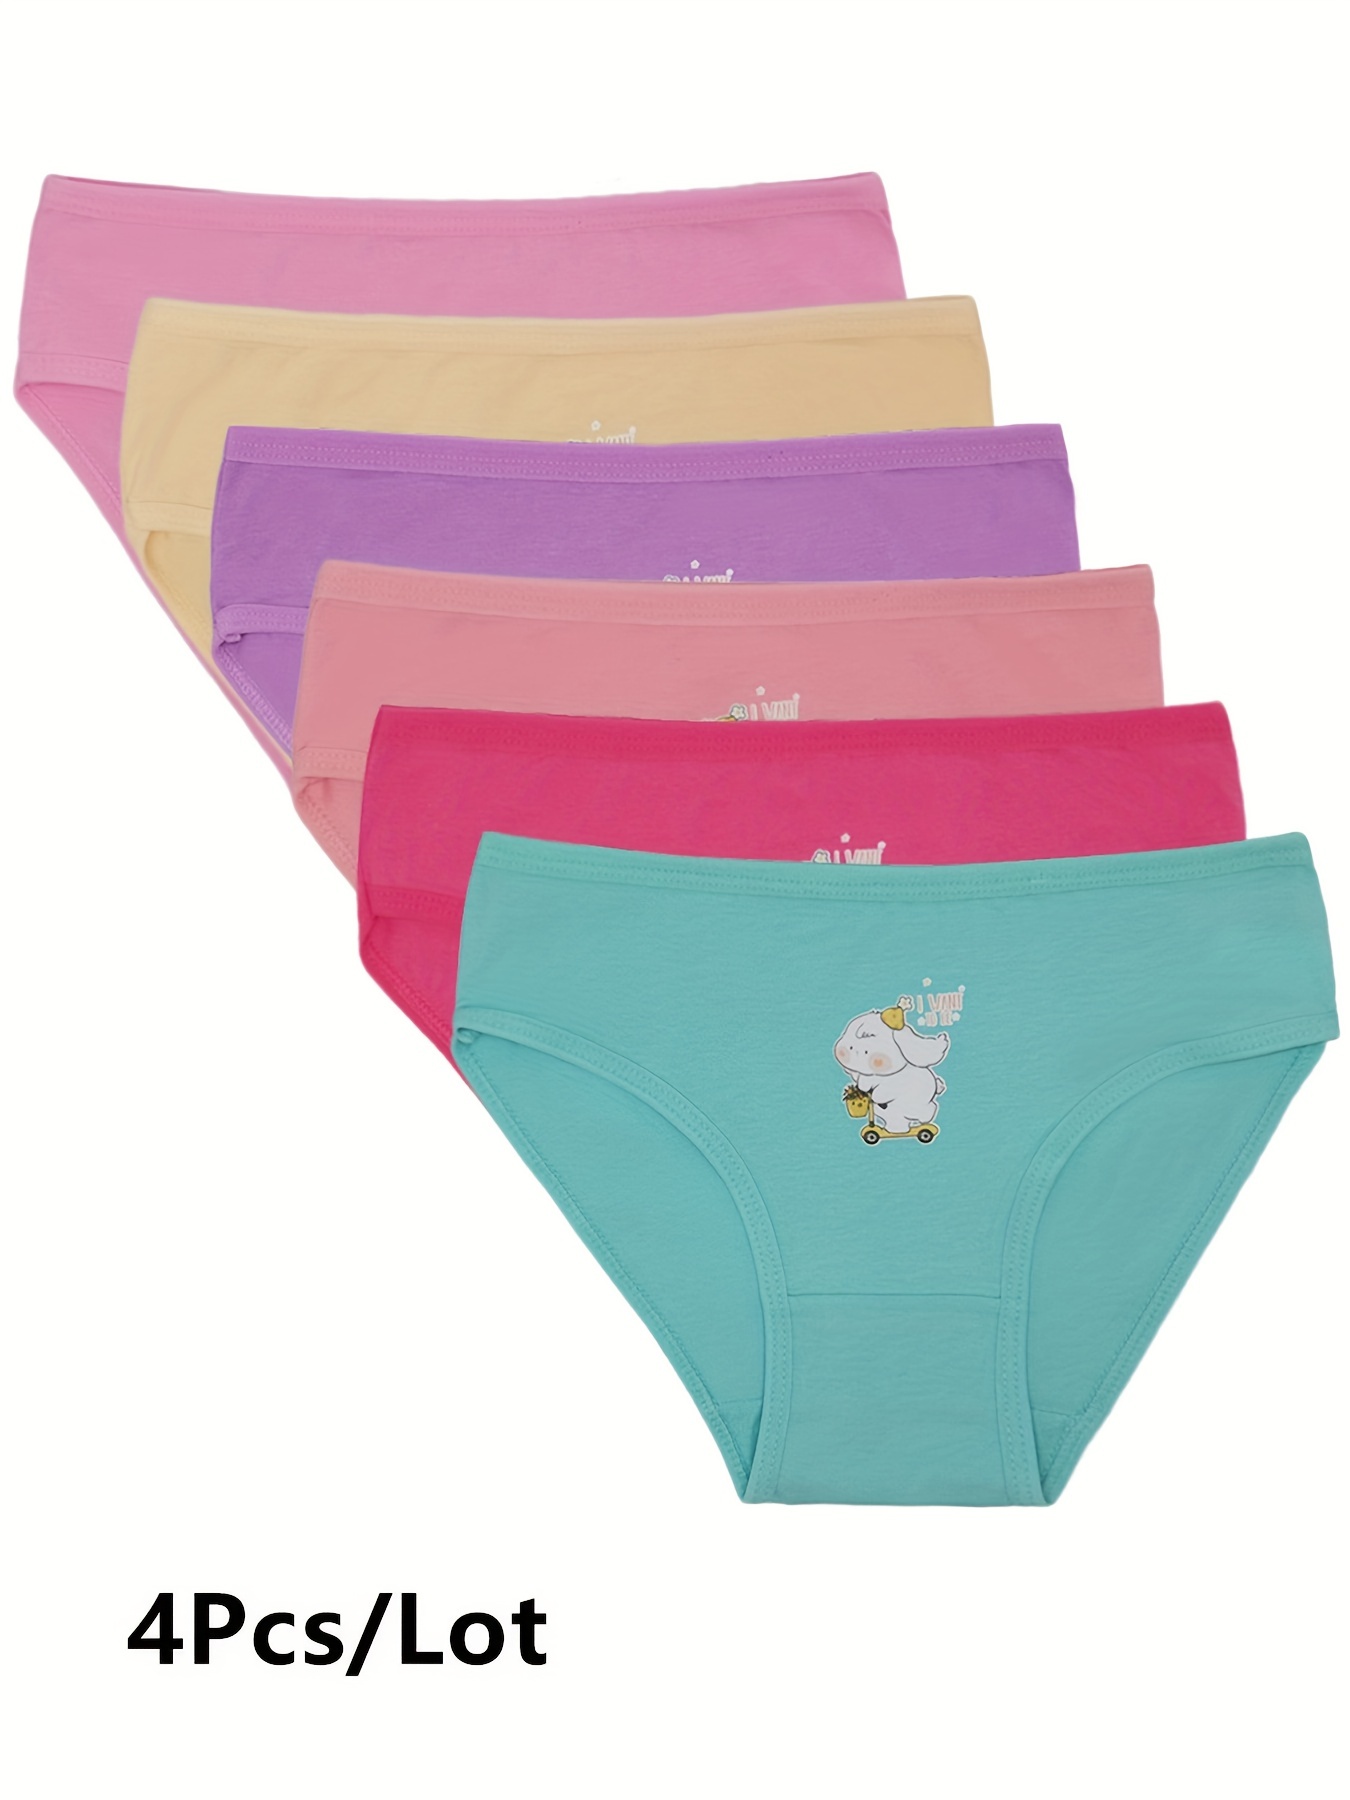 Animal Full Brief Knickers 5 Pack, Lingerie